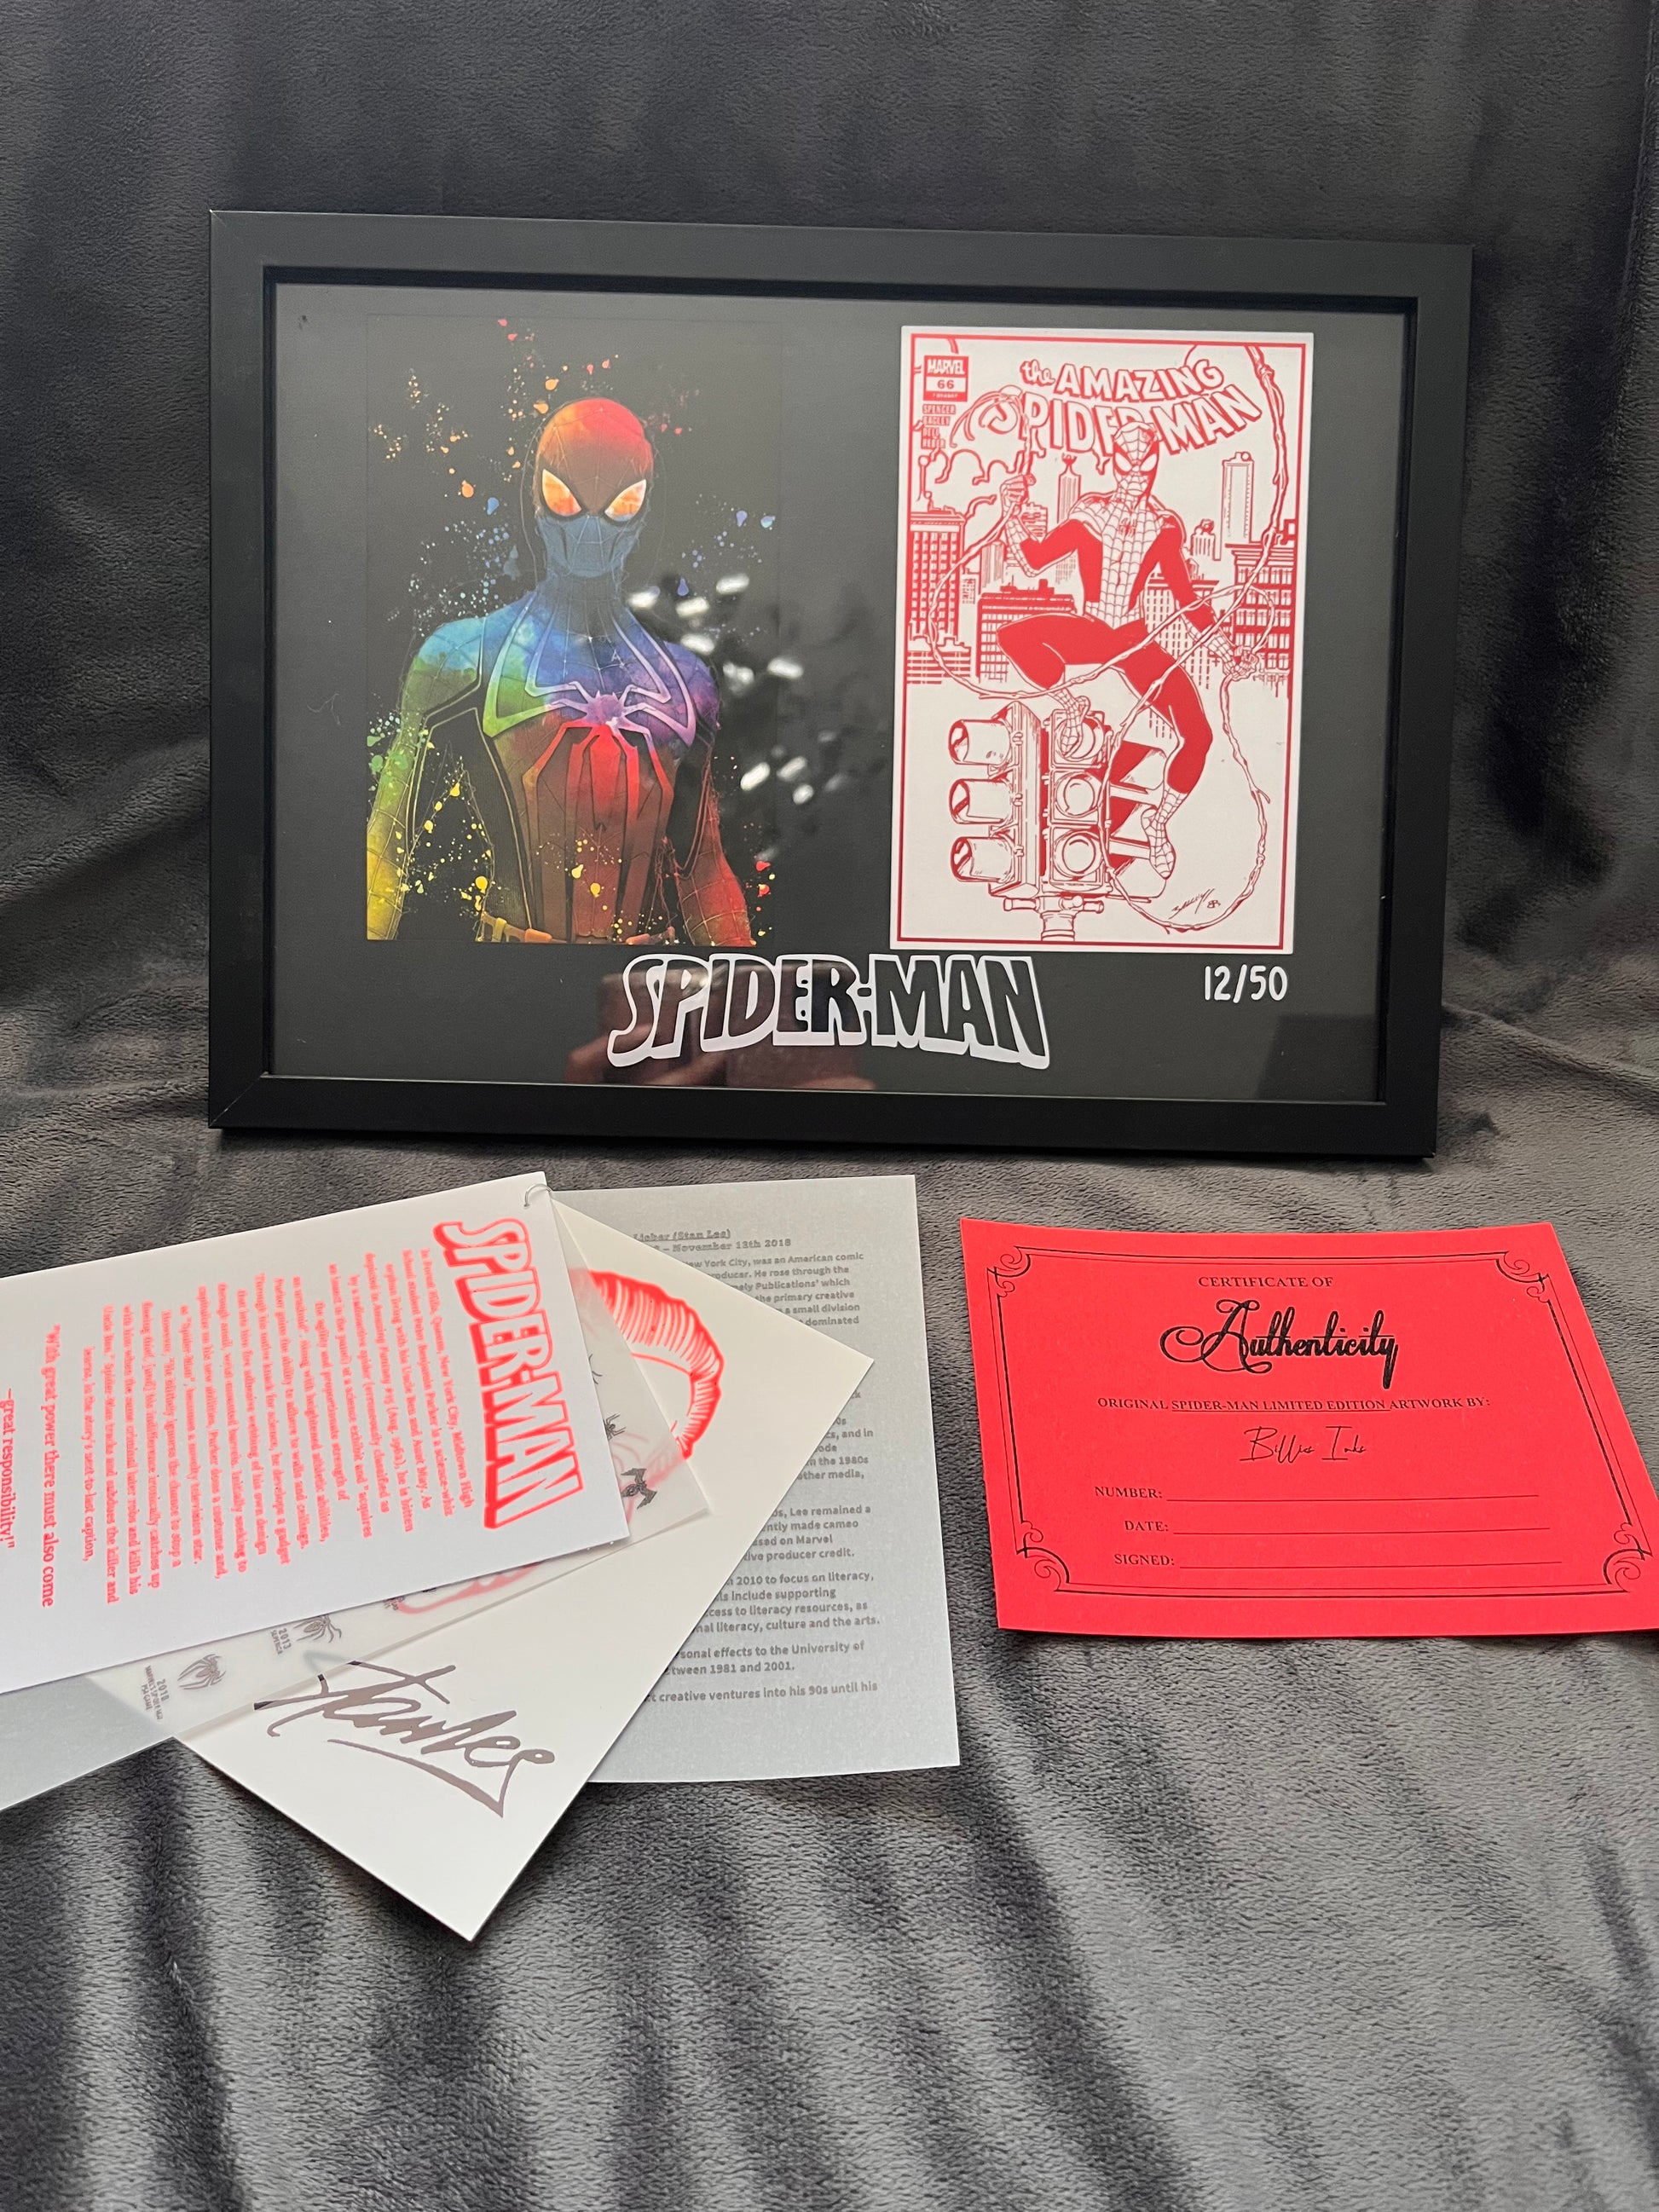 Introducing our Exclusive Limited Edition A4 Framed Spider-Man Print - a true collector's gem! With only 50 prints available worldwide, this vibrant Spider-Man artwork is a visual delight. Featuring a colourful Spider-Man illustration alongside a mesmerising foil-printed comic cover, this piece is a must-have for Spidey enthusiasts and art connoisseurs alike.